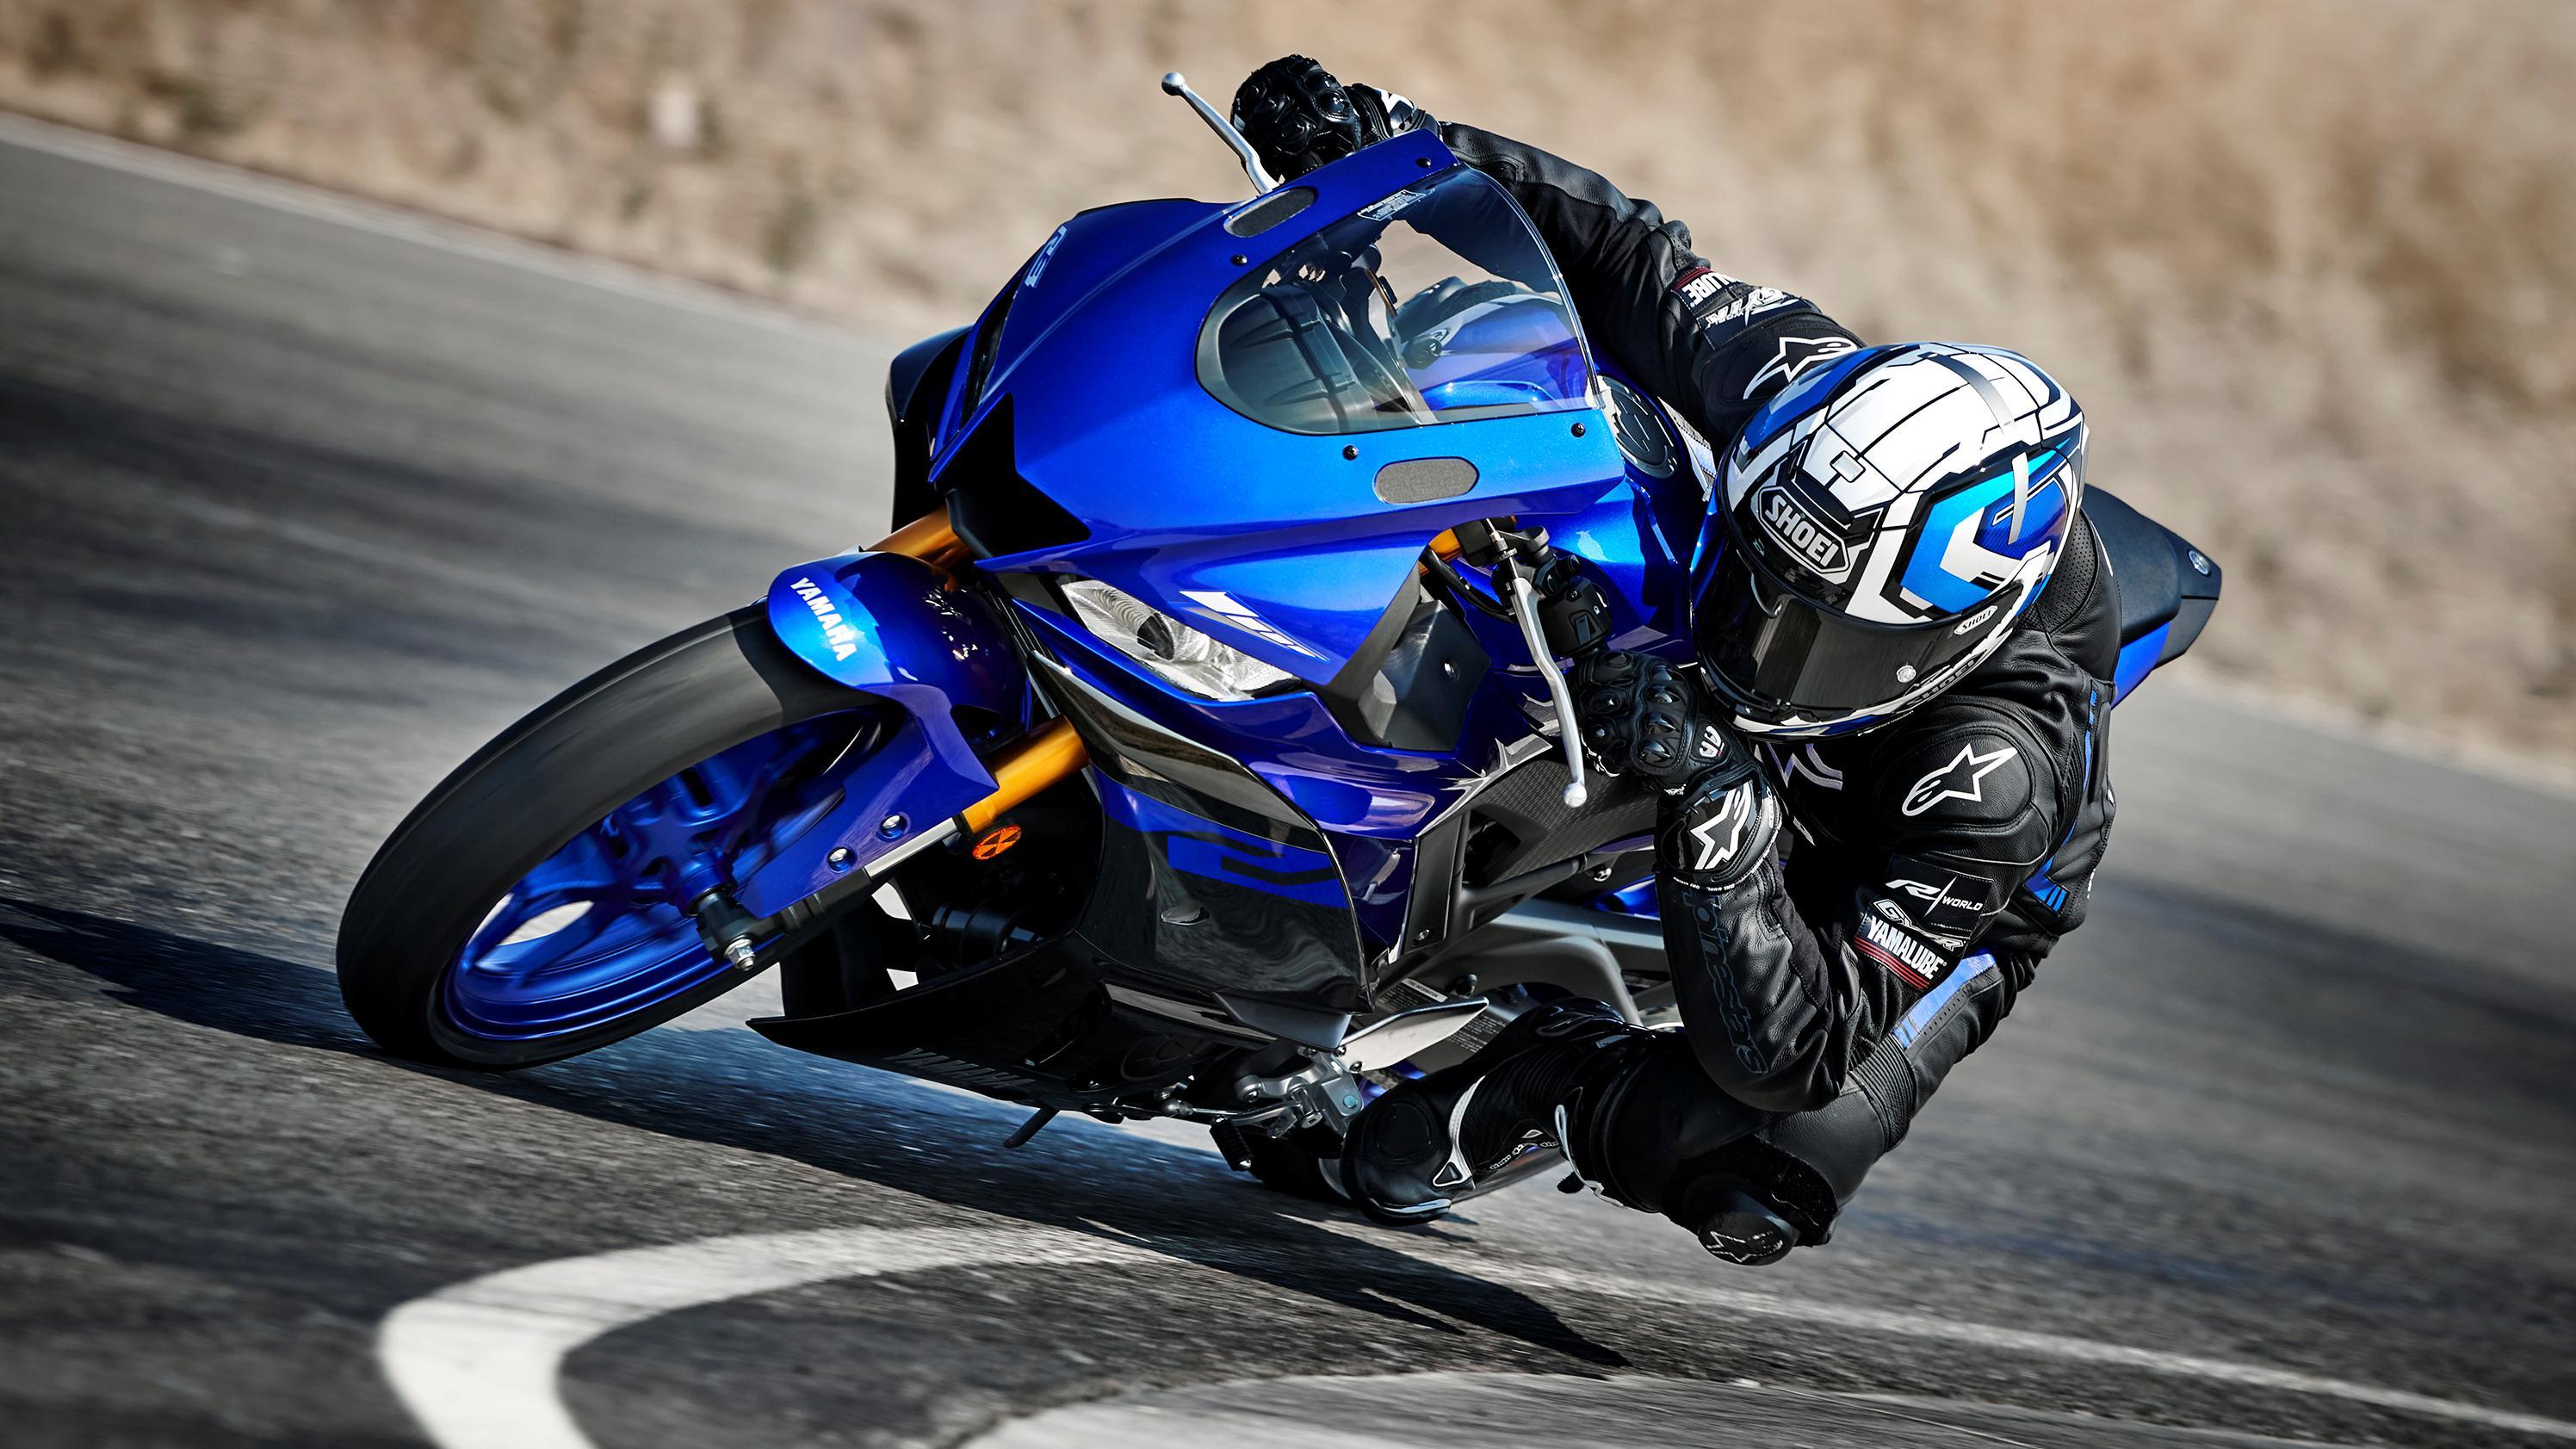 Yamaha YZF R3 Picture, Photo, Wallpaper